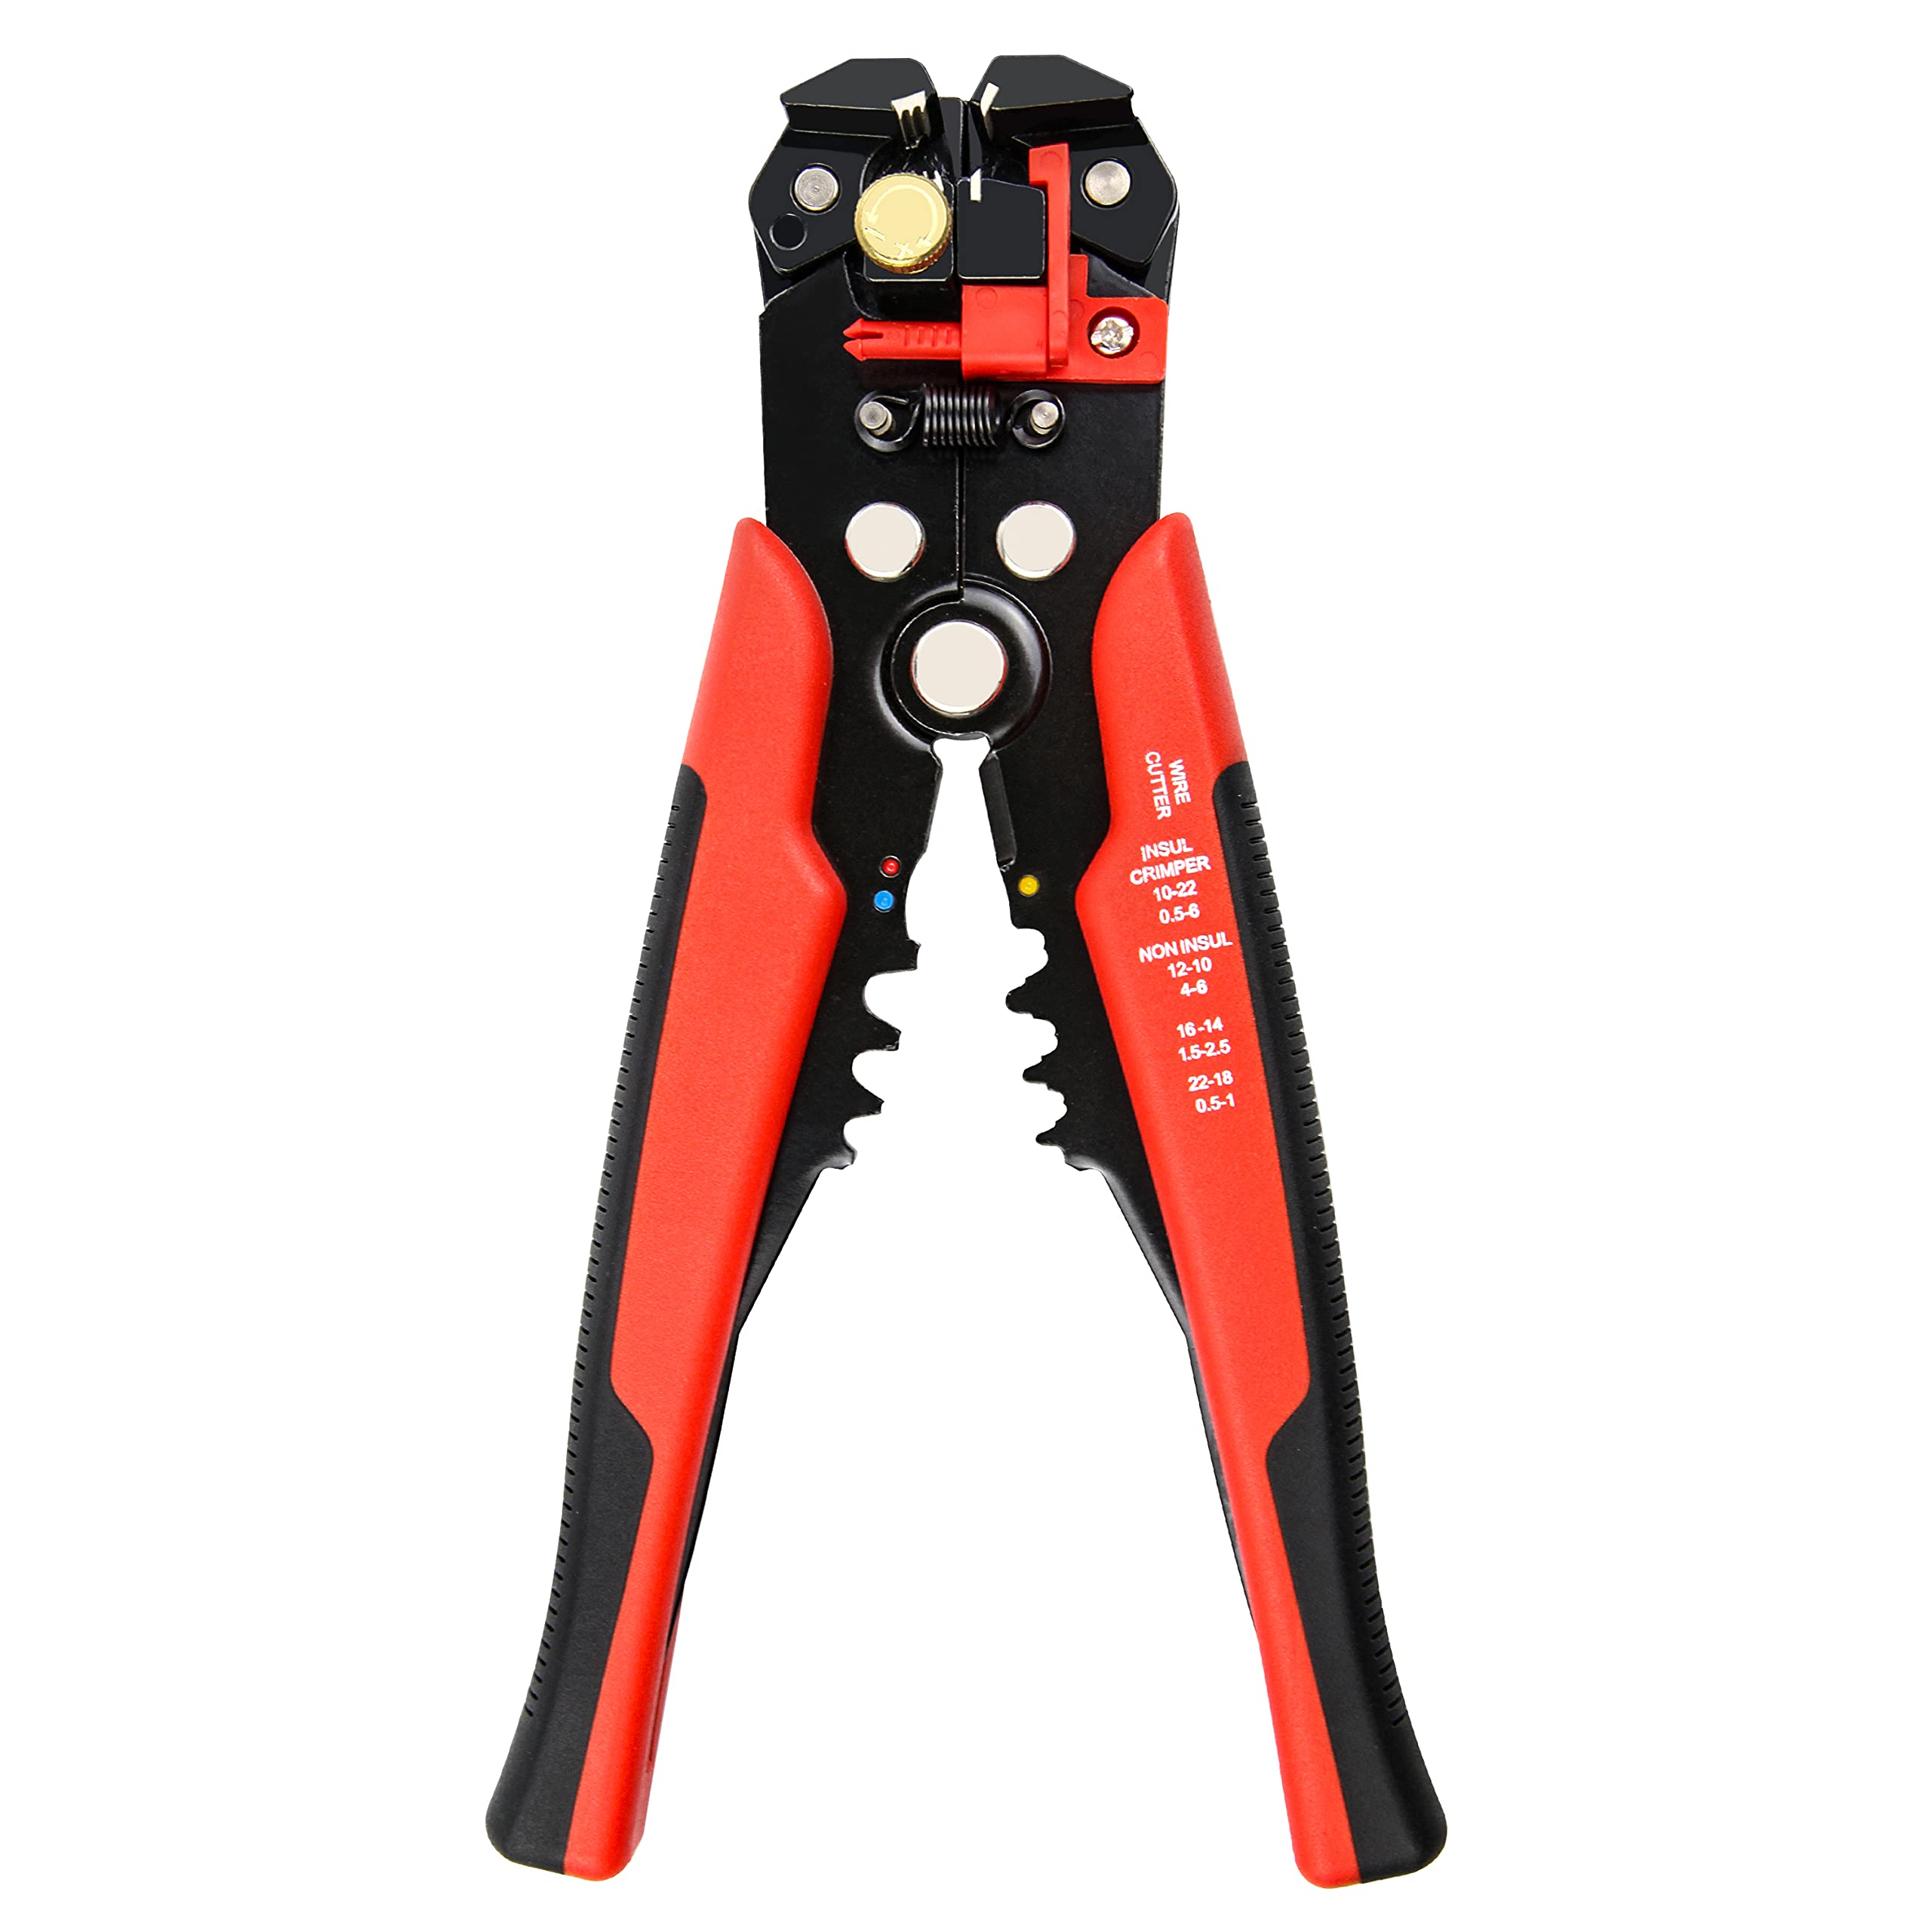 8" YIYITOOLS Alloy Steel Wire Stripping Pliers Tool w/ Self-Adjusting Jaws $6.35 + Free Shipping w/ Prime or on $35+